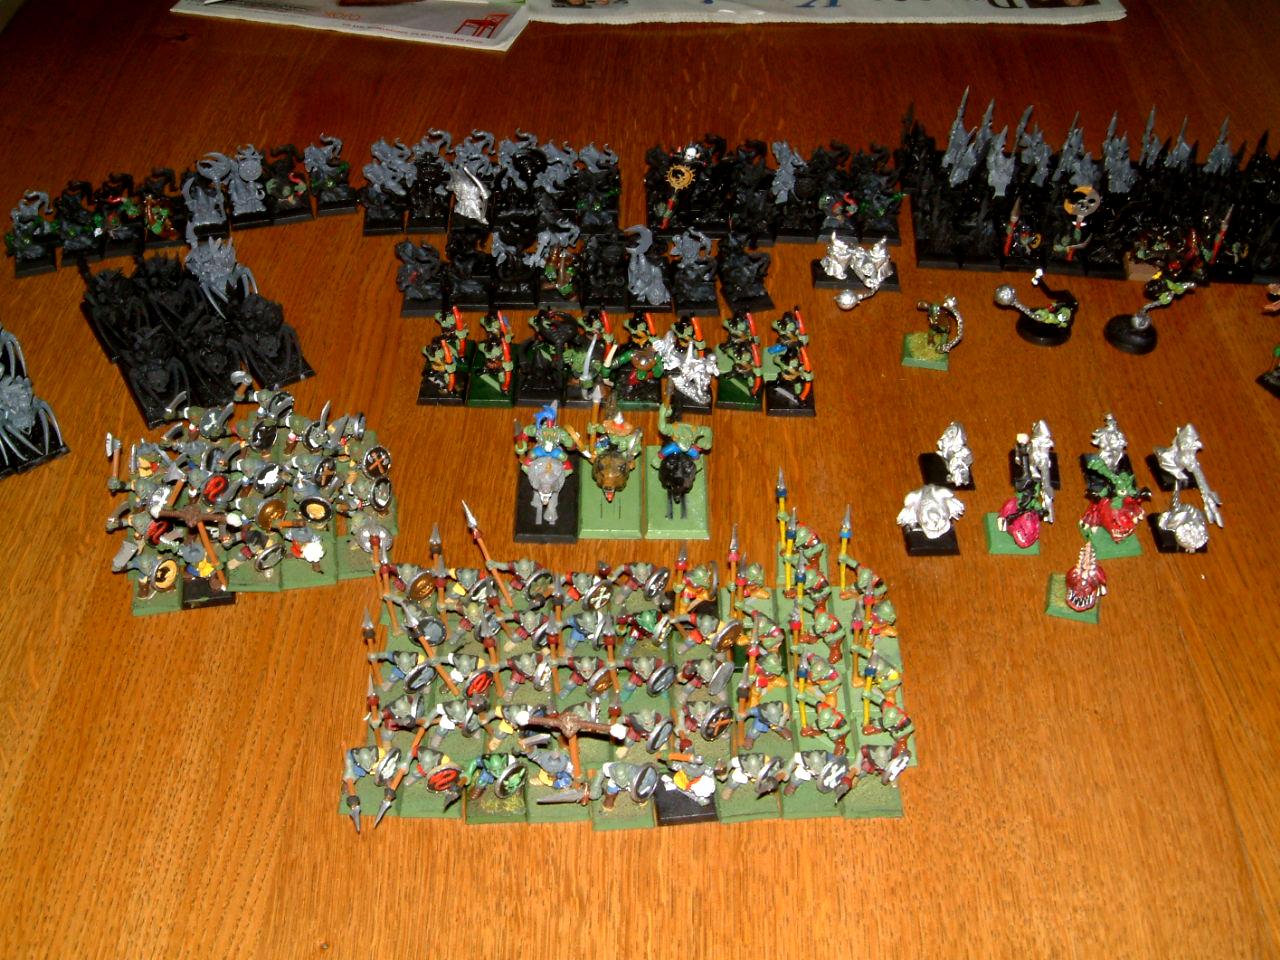 Army, Bearers, Black, Chaos, Command, Dreadnought, Goblins, Greenskins, Legion, Nurgle, Scratch Build, Soldier, Space, Space Marines, Word, Work In Progress